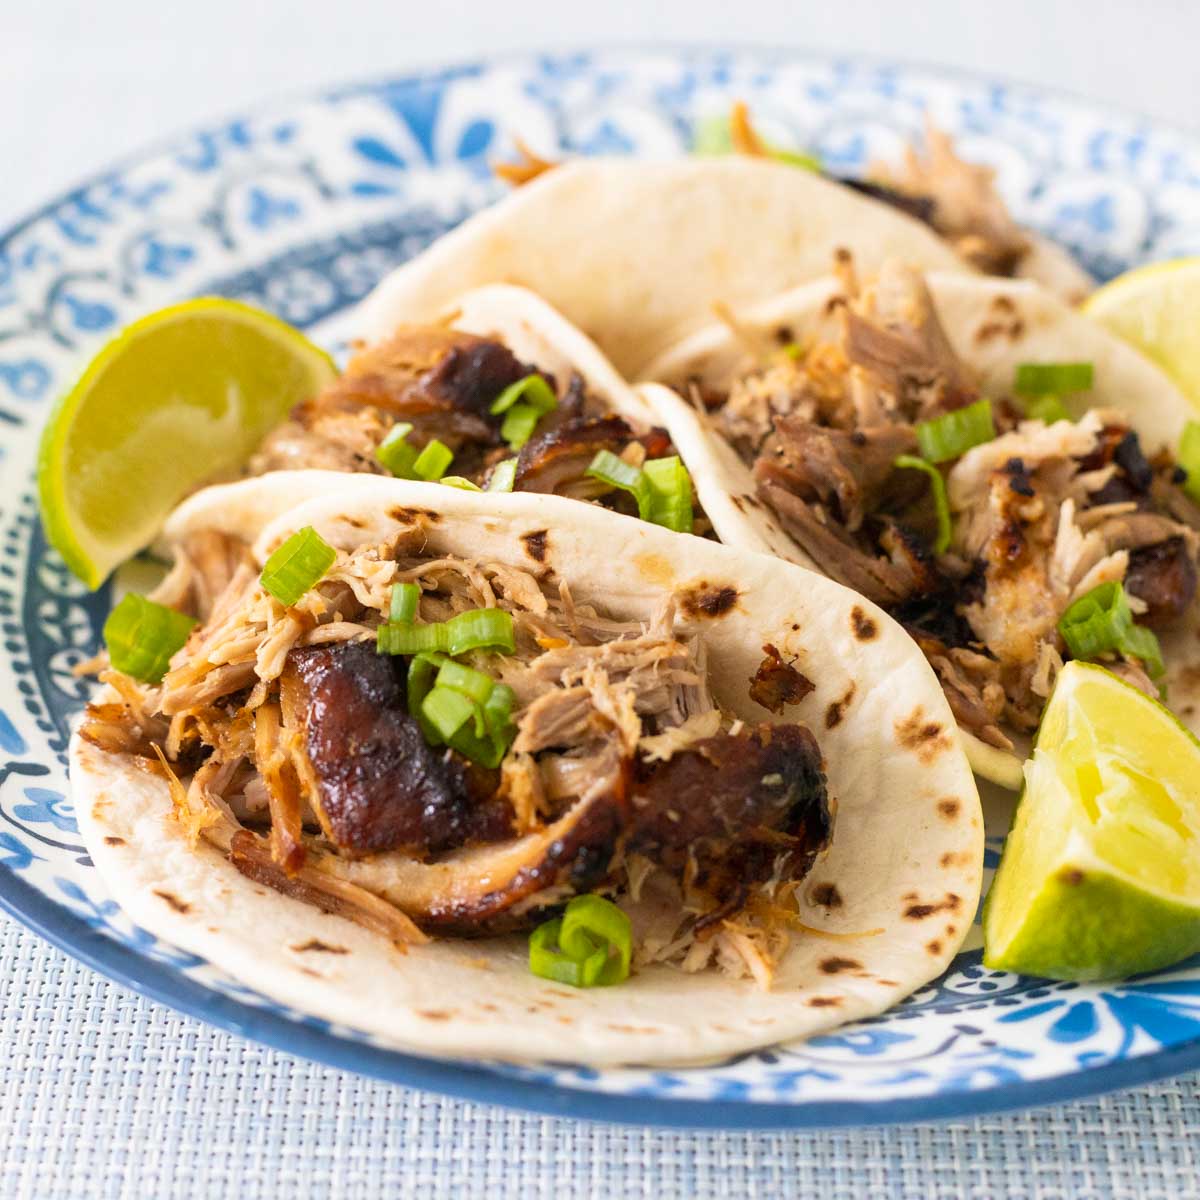 The shredded pork has been added to street taco tortilla shells. Green onions are sprinkled over the top and wedges of limes are on the side.